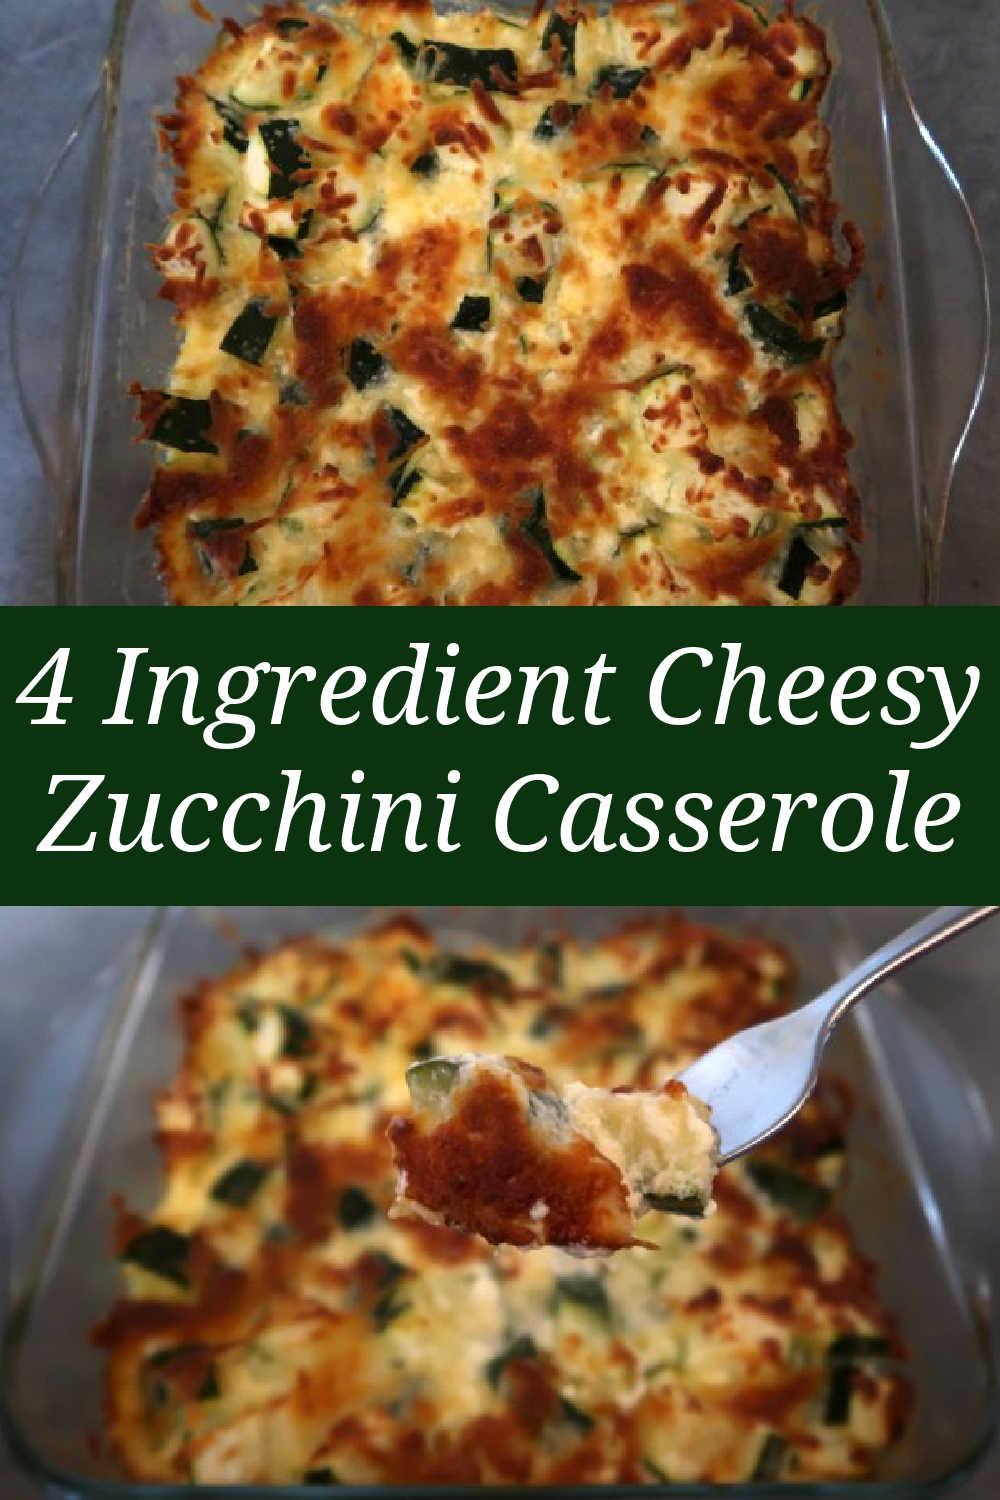 Cheesy Zucchini Casserole Recipe - Easy Courgette Au Gratin or Cheesy Bake with only 4 ingredients - Low Carb & Keto Friendly Dinner or Side Dish Idea.